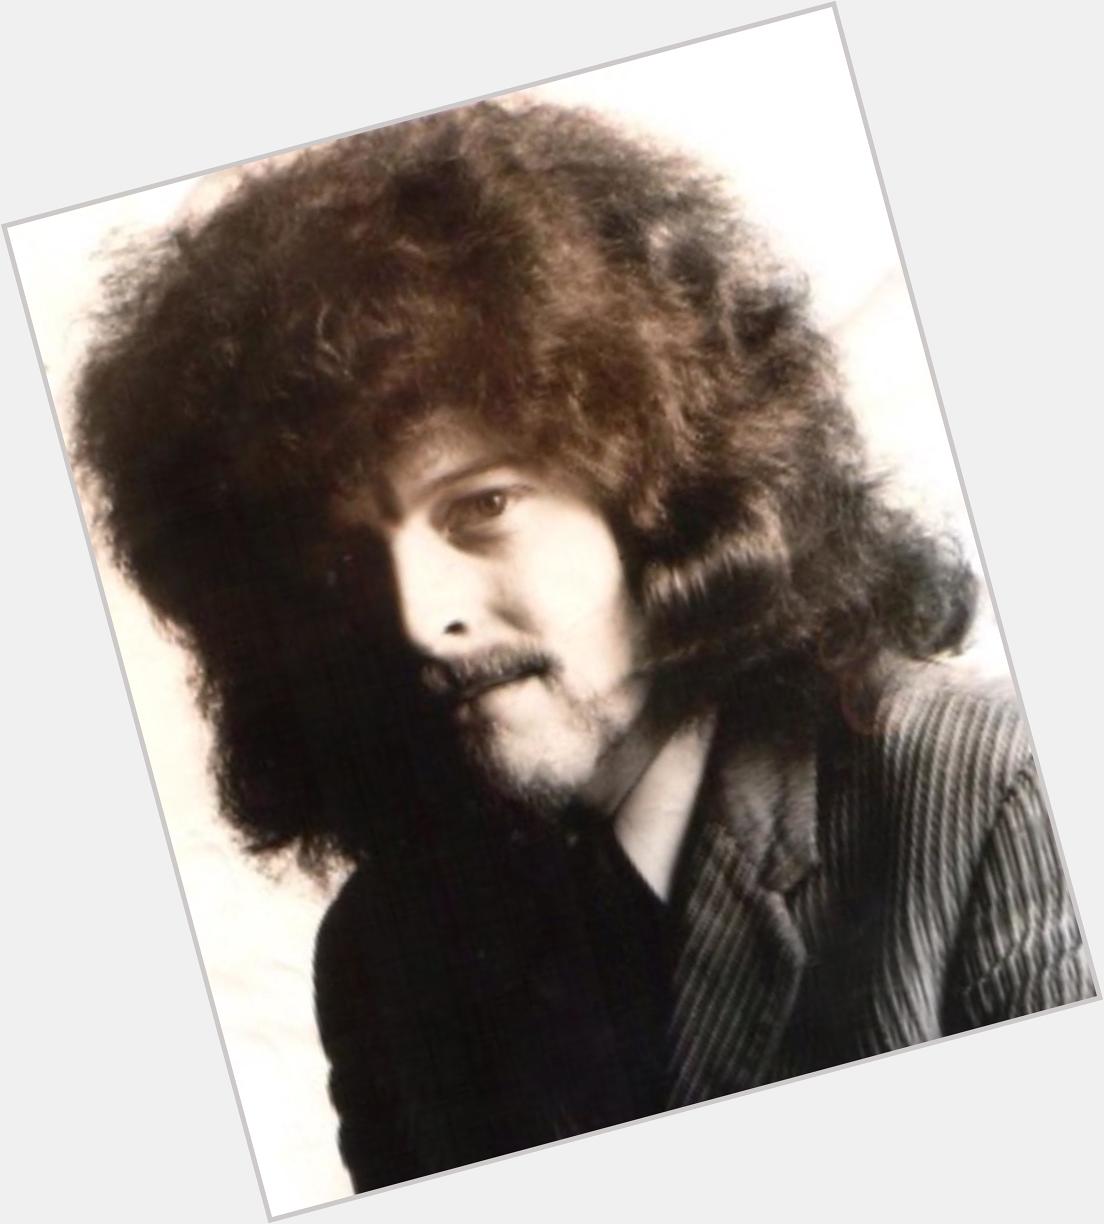 07/04/1943 Happy Birthday, Mick Abrahams, original guitarist in Jethro Tull, then Blodwyn Pig and solo ...awesome ... 